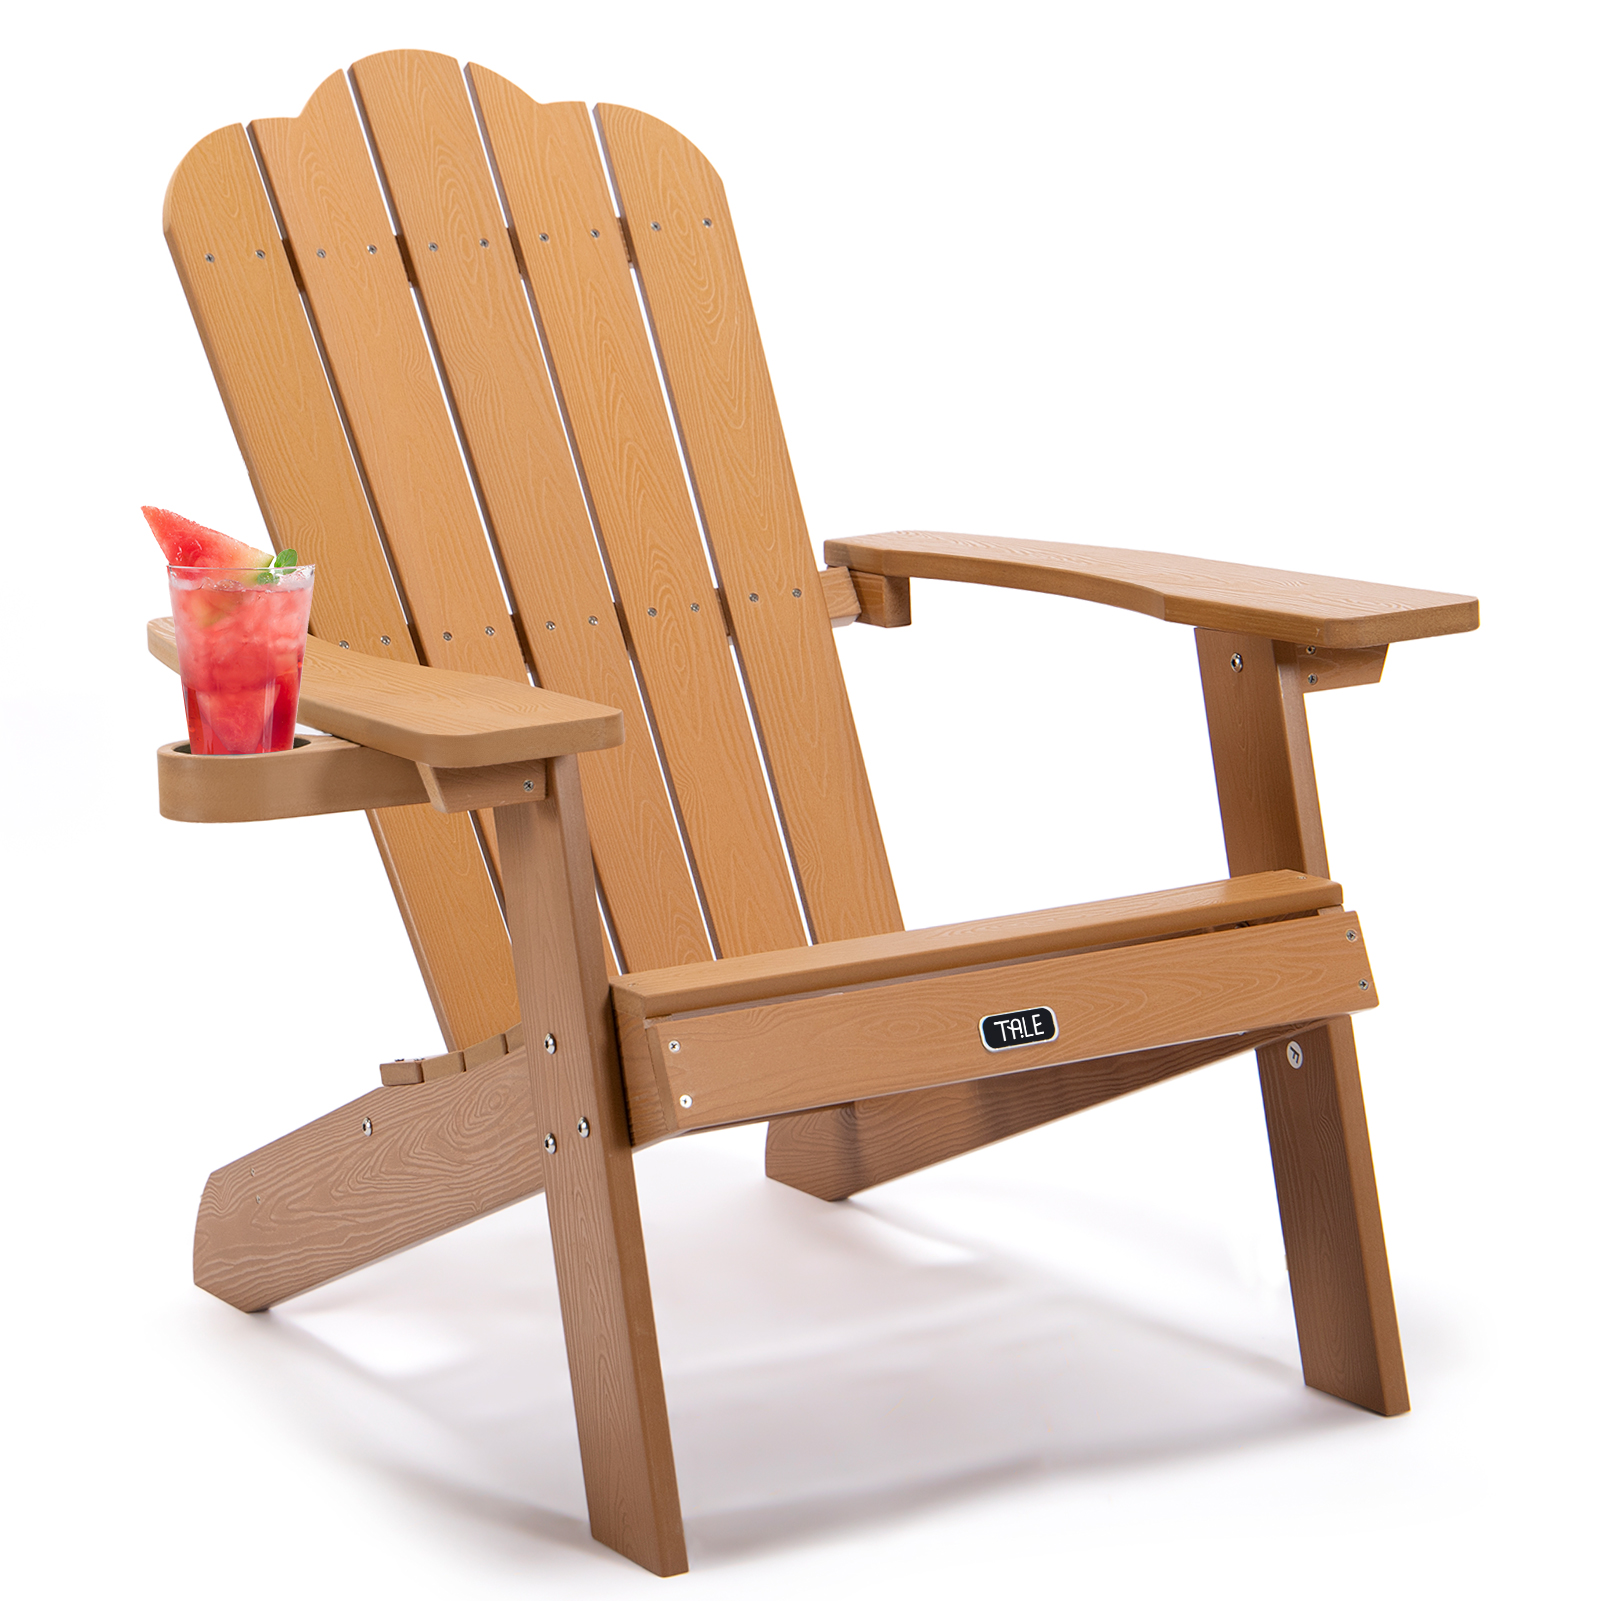 KOFUN Adirondack Chair with Cup Holder, Patio Outdoor Chairs, Weather Resistant Lounge Chair, Fade-Resistant, Backyard Furniture Painted Chair, for Lawn Outdoor Patio Deck Garden Porch Lawn - image 1 of 7